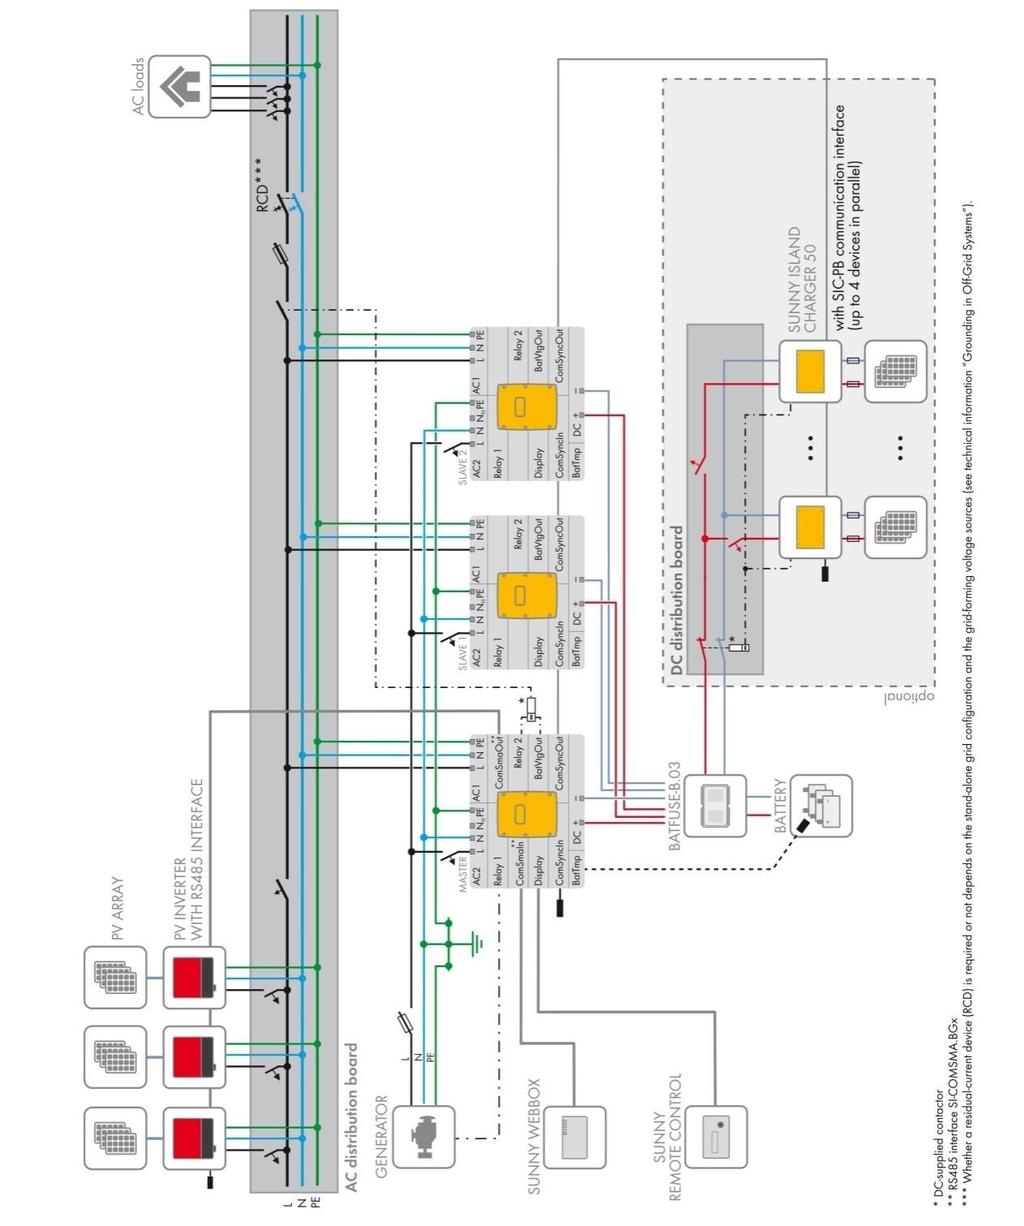 3.2 Single-Cluster System 3.2.1 Circuit Overview Figure 12: Circuitry overview